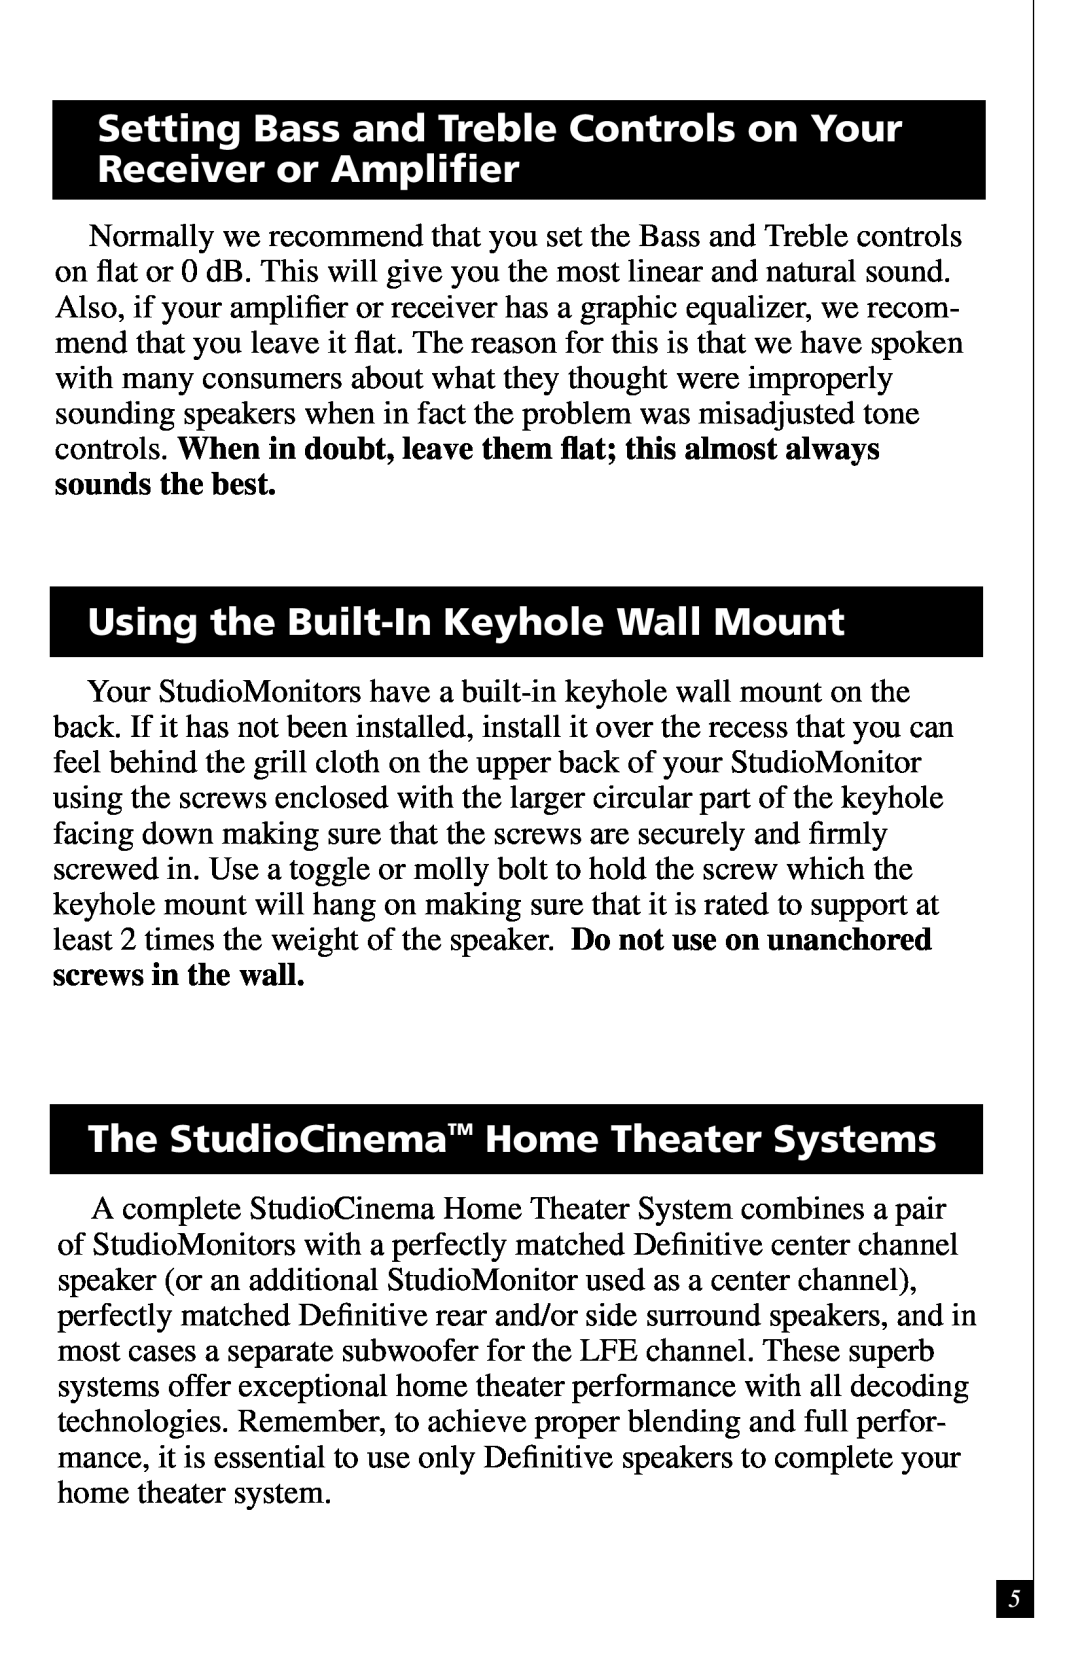 Definitive Technology 450, Studio Monitor Using the Built-InKeyhole Wall Mount, The StudioCinemaTM Home Theater Systems 